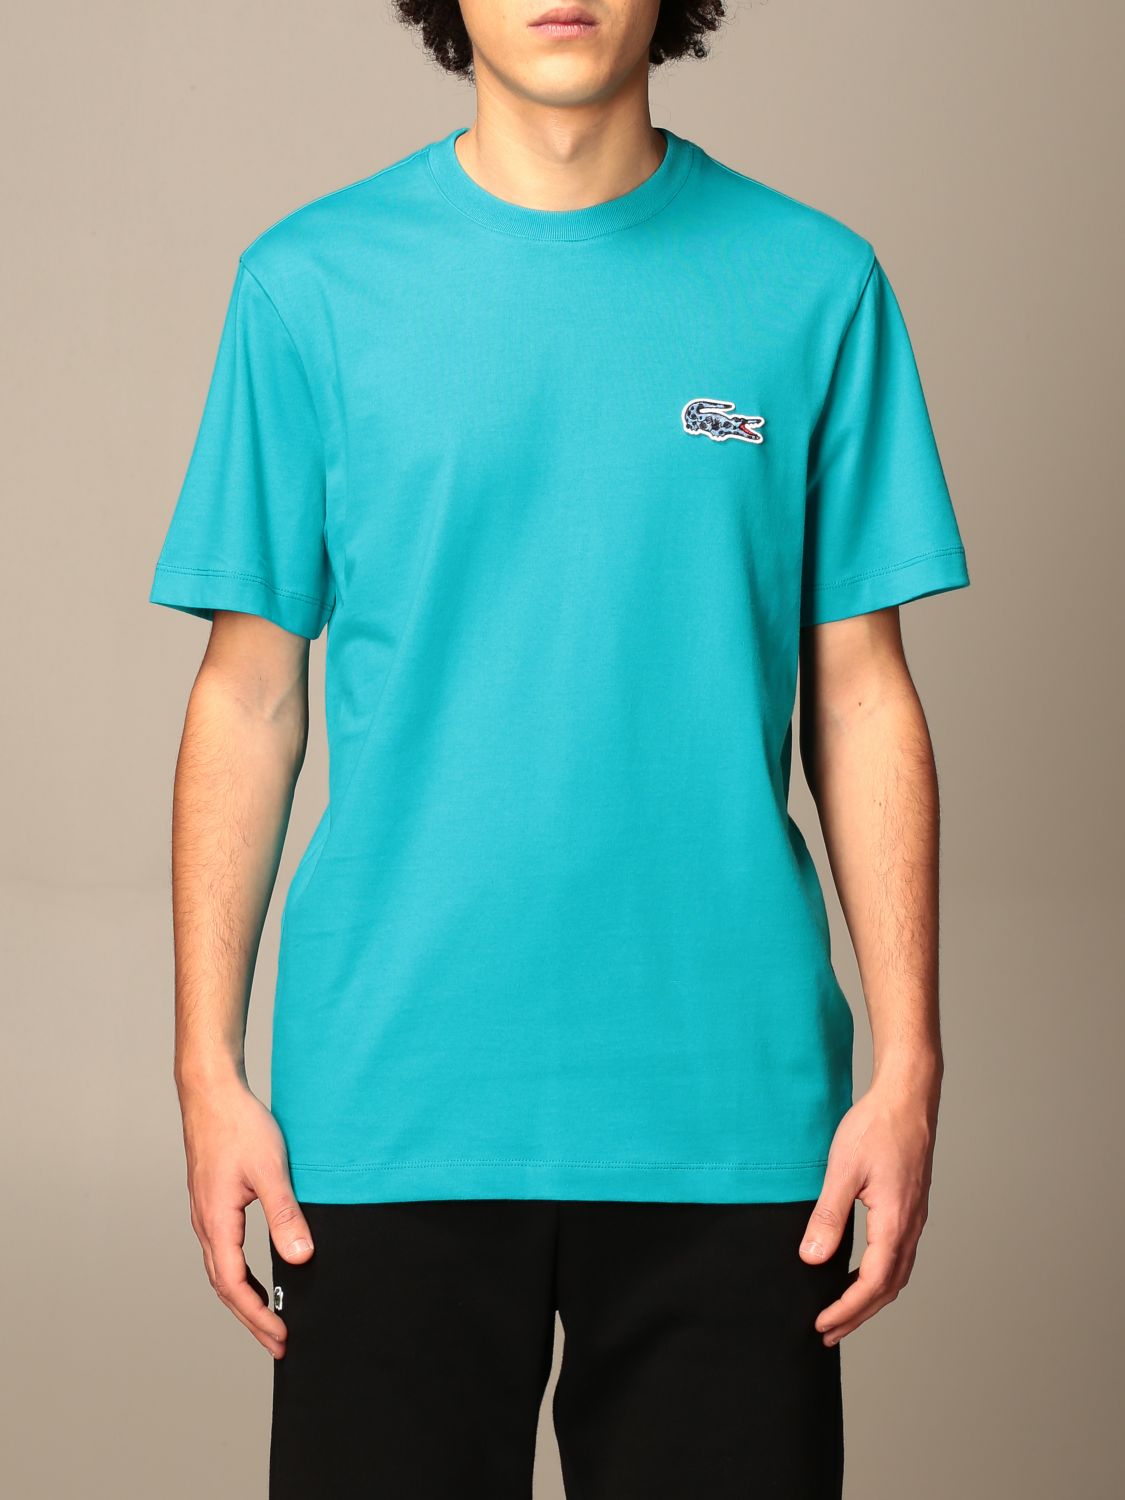 T-Shirt Lacoste Homme Turquoise 